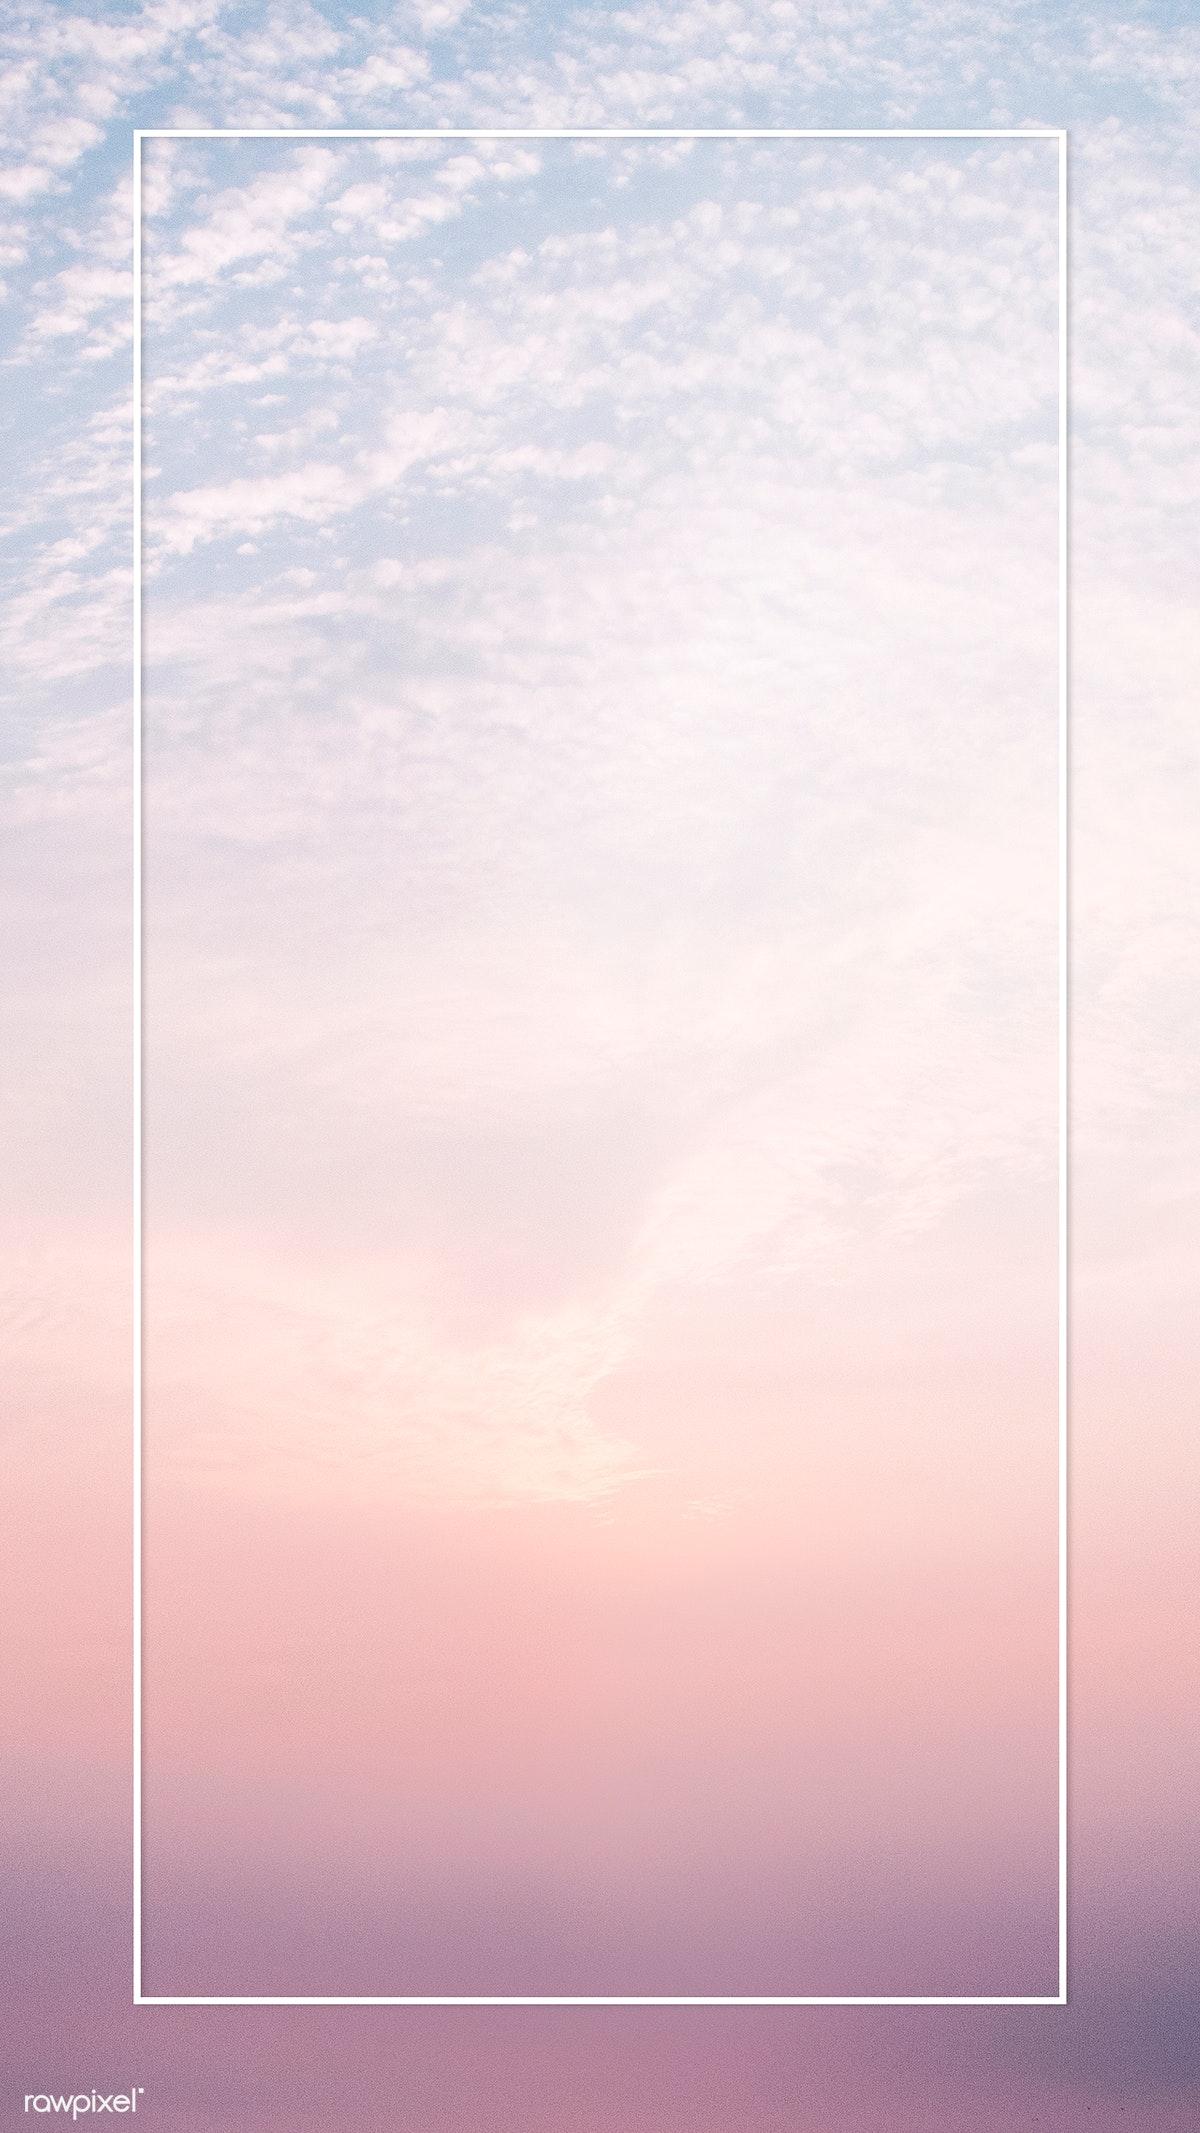 Download premium image of Rectangle frame on a cotton candy sky mobile